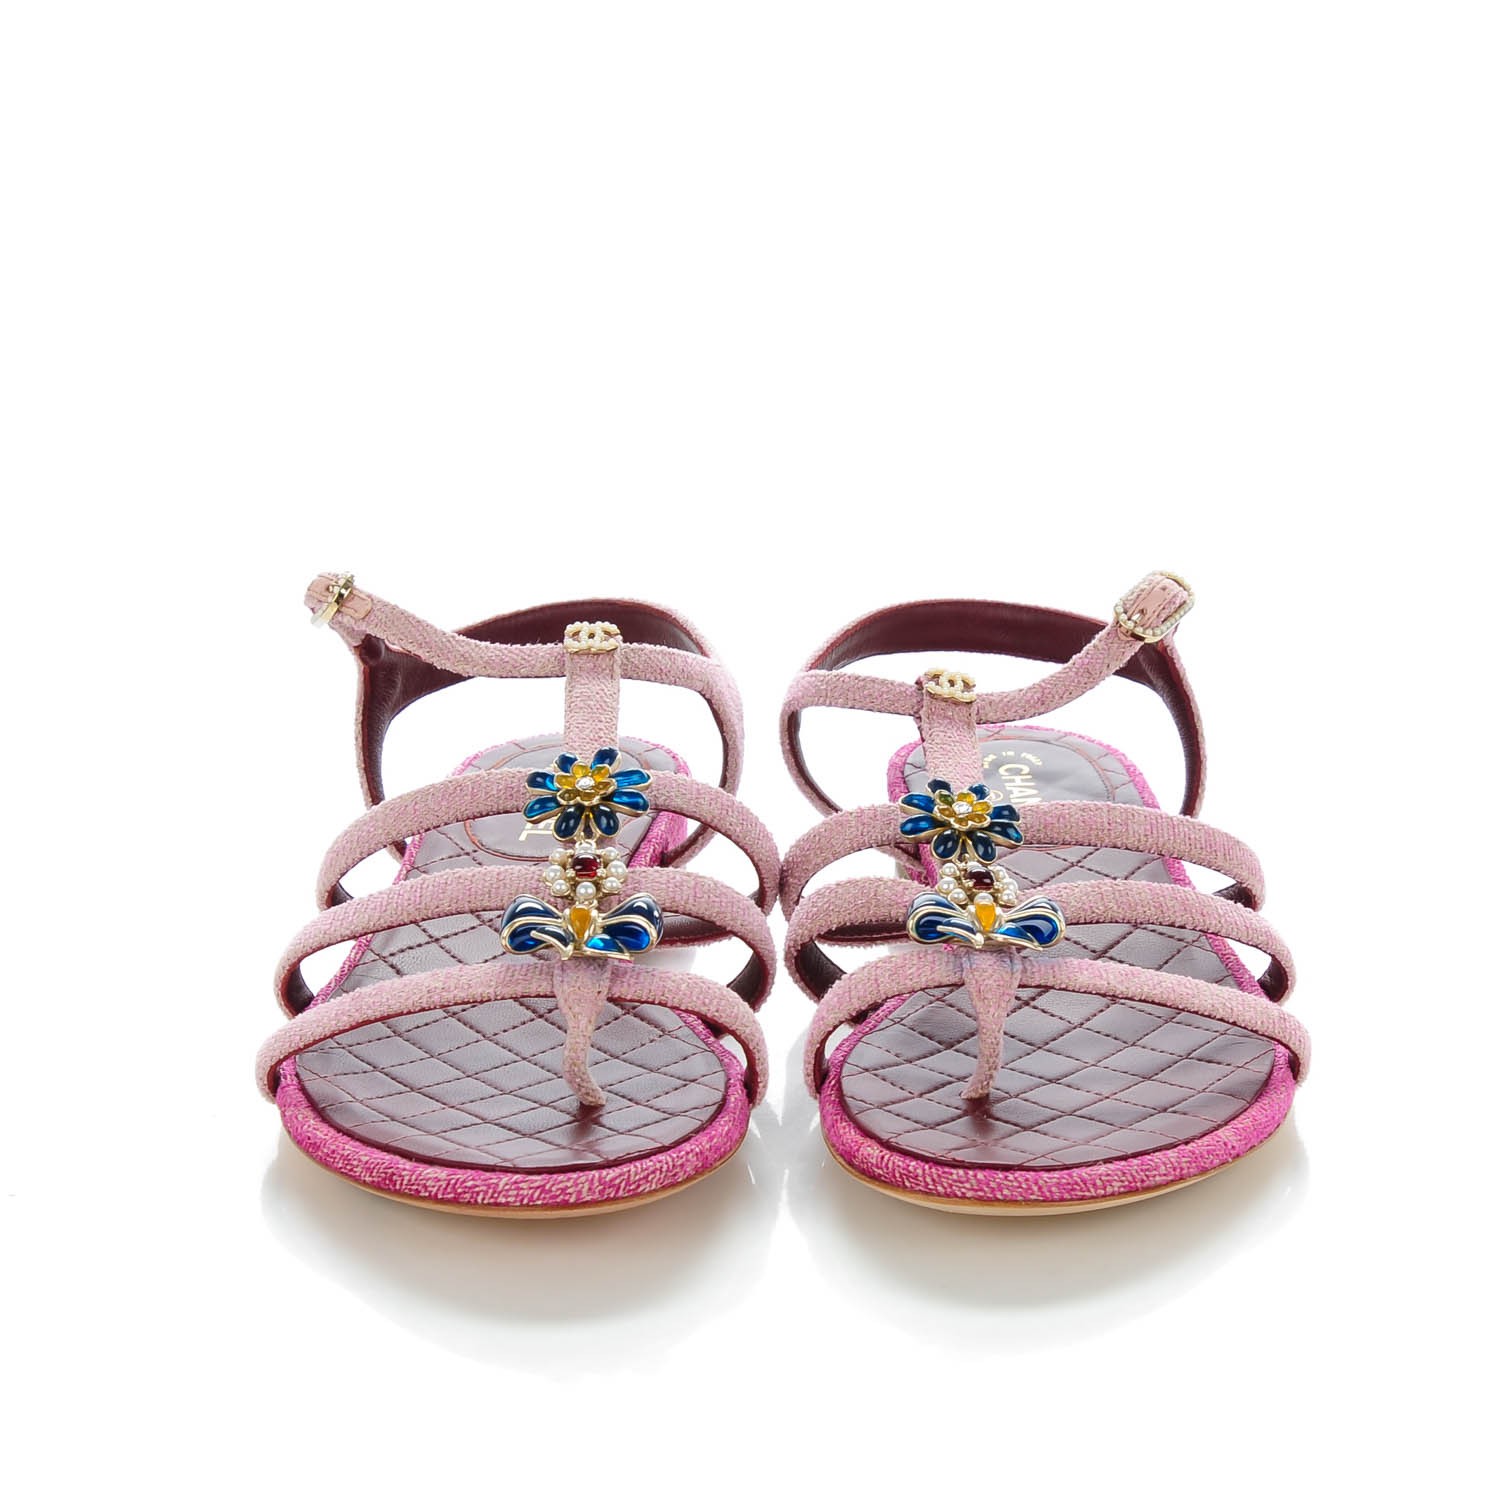 CHANEL Tweed Poured Glass Sandals 38.5 Pink 137376